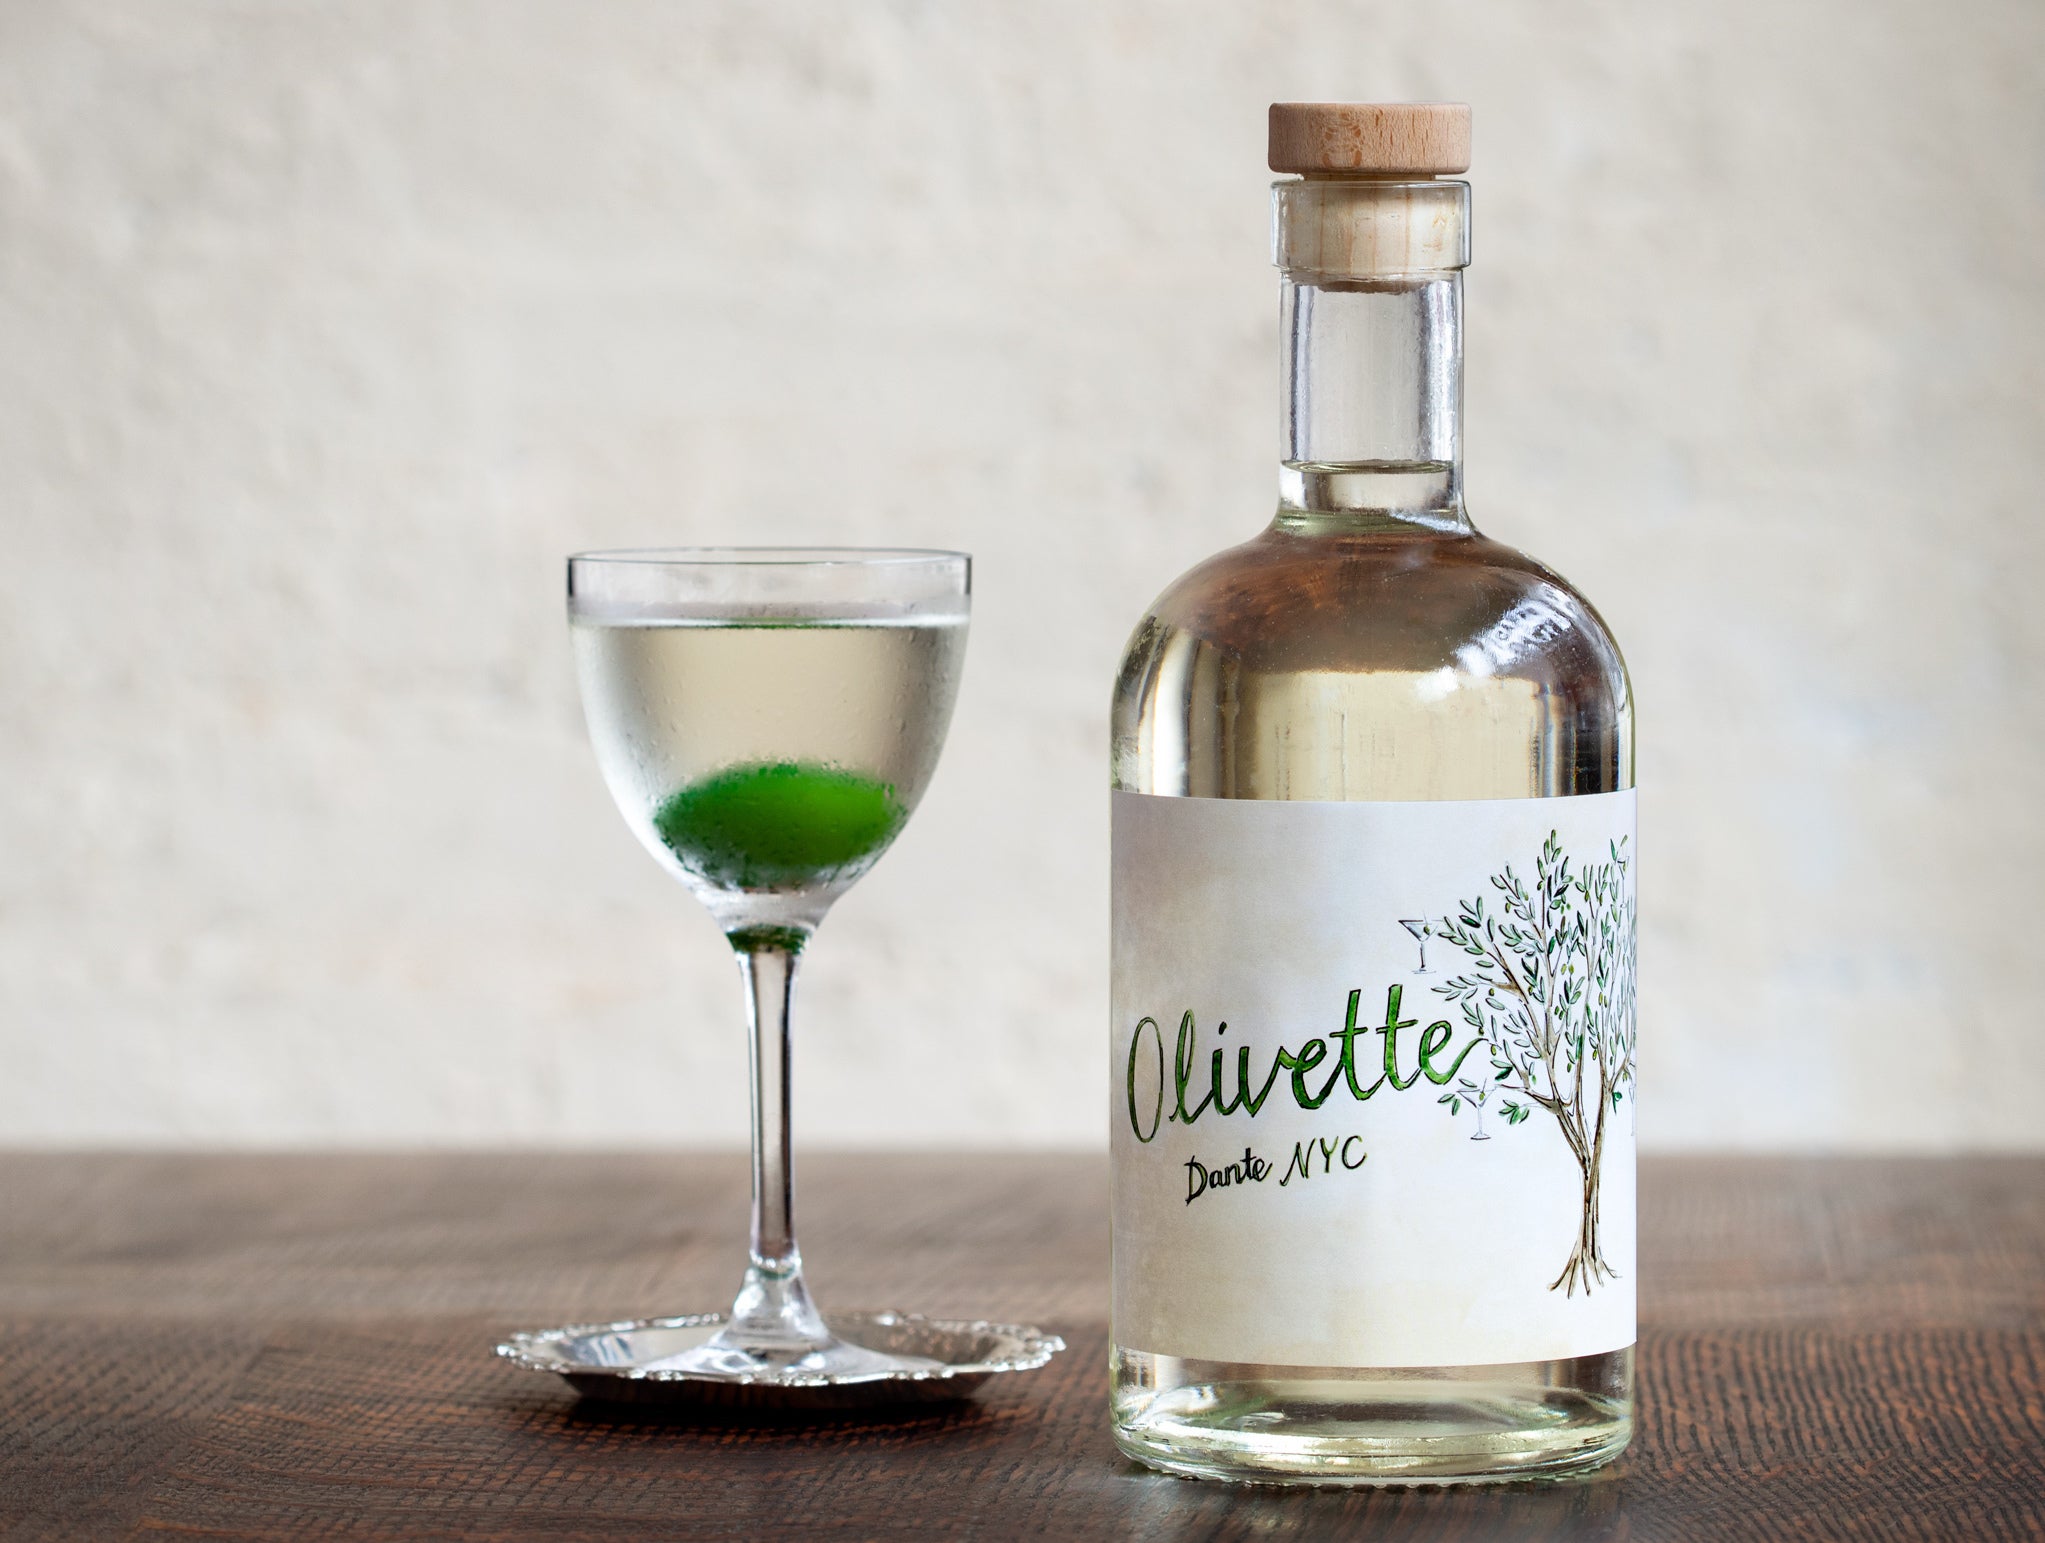 Cocktail of the Week: Olivette Martini from Dante NYC